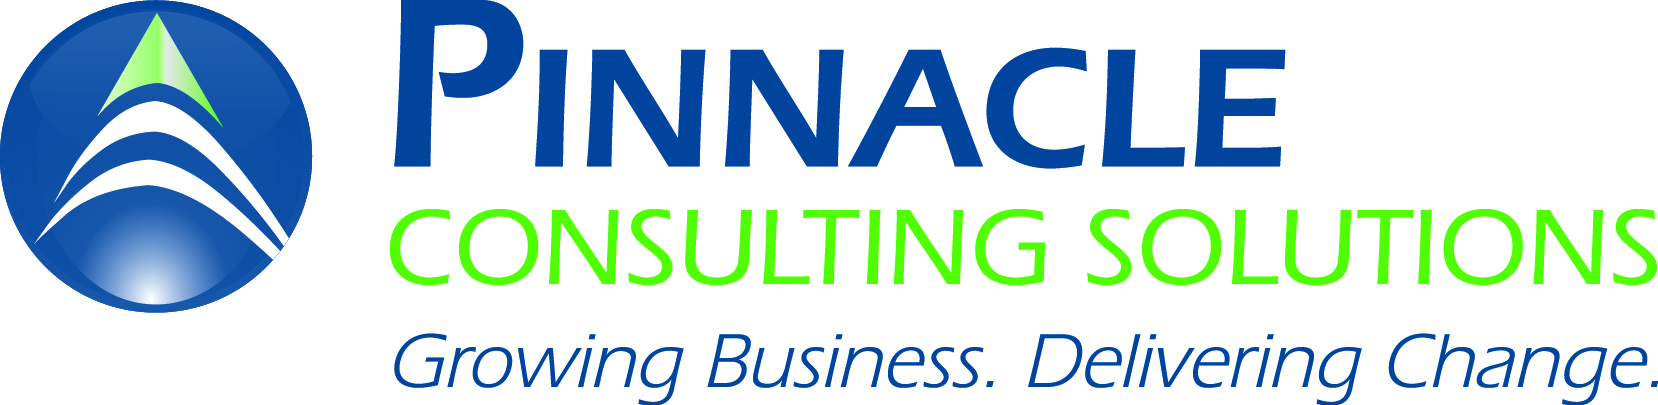 Pinnacle Consulting Solutions